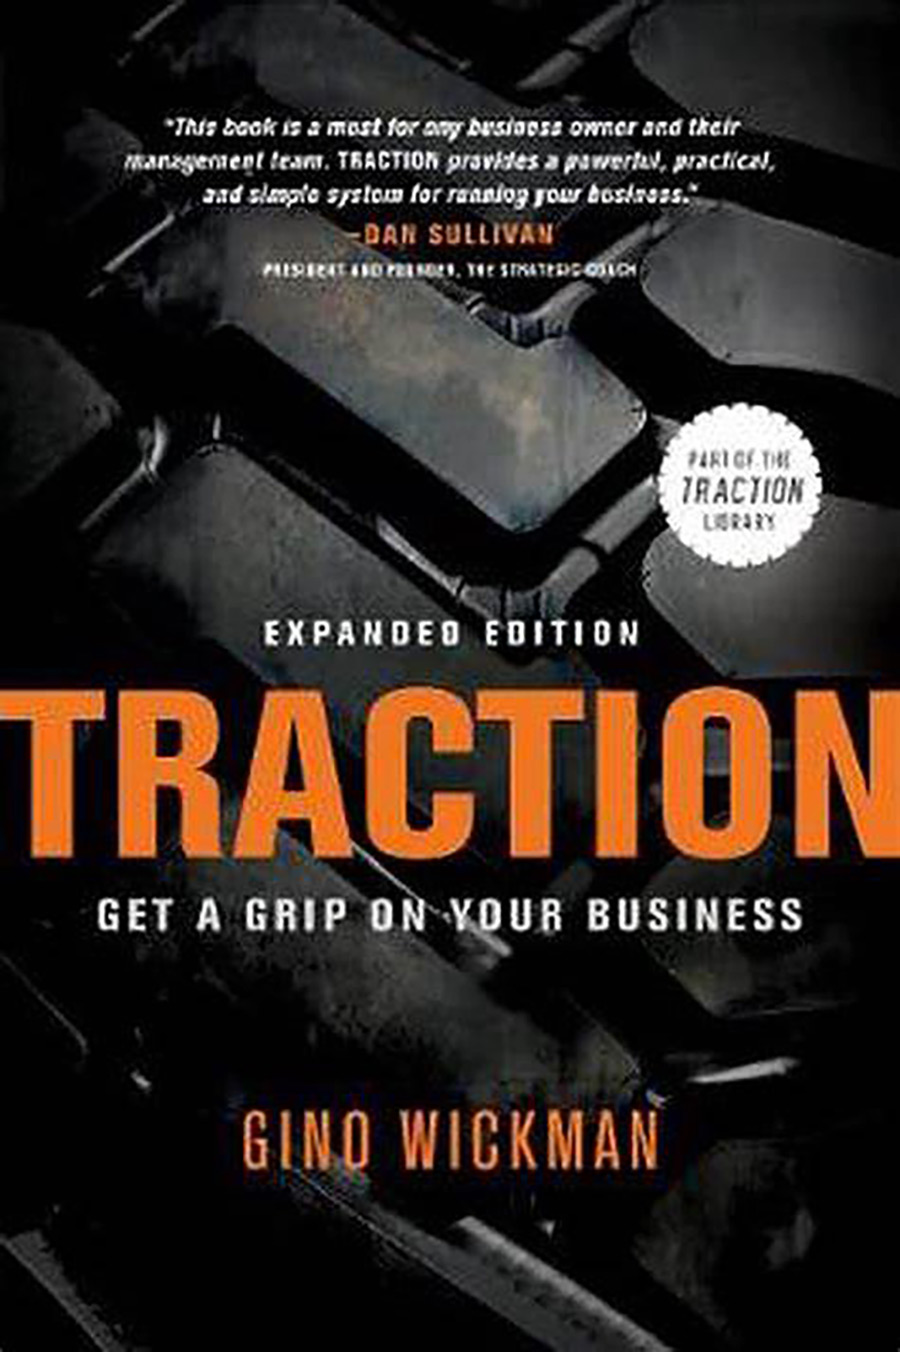 Book cover of Traction: Get a Grip On Your Business by Gino Wickman